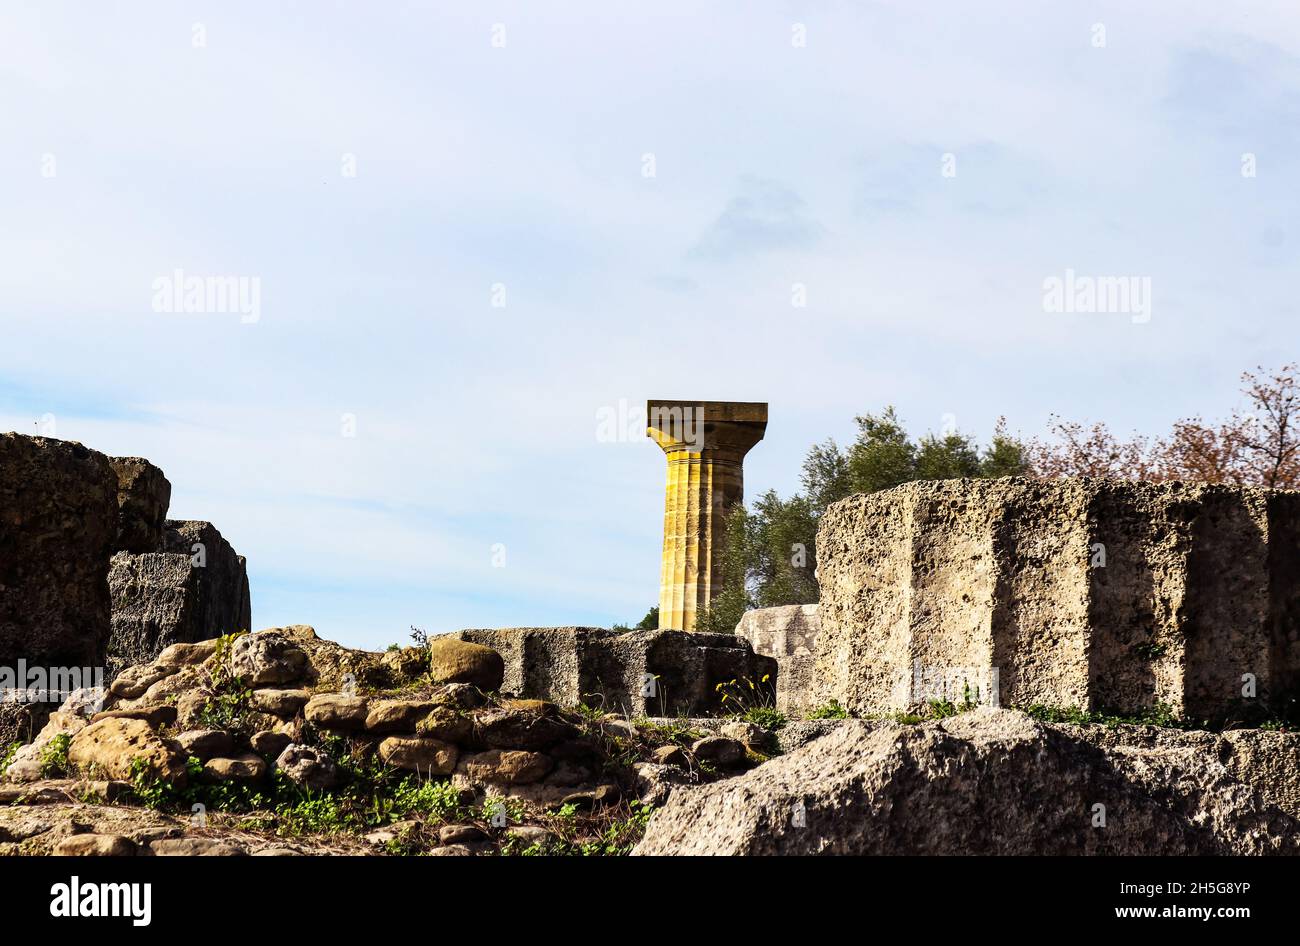 Fallen columns with weeds and wildflowers at Ancient Corinth in Greece with one remaining column of the Temple of Zeus in the background Stock Photo